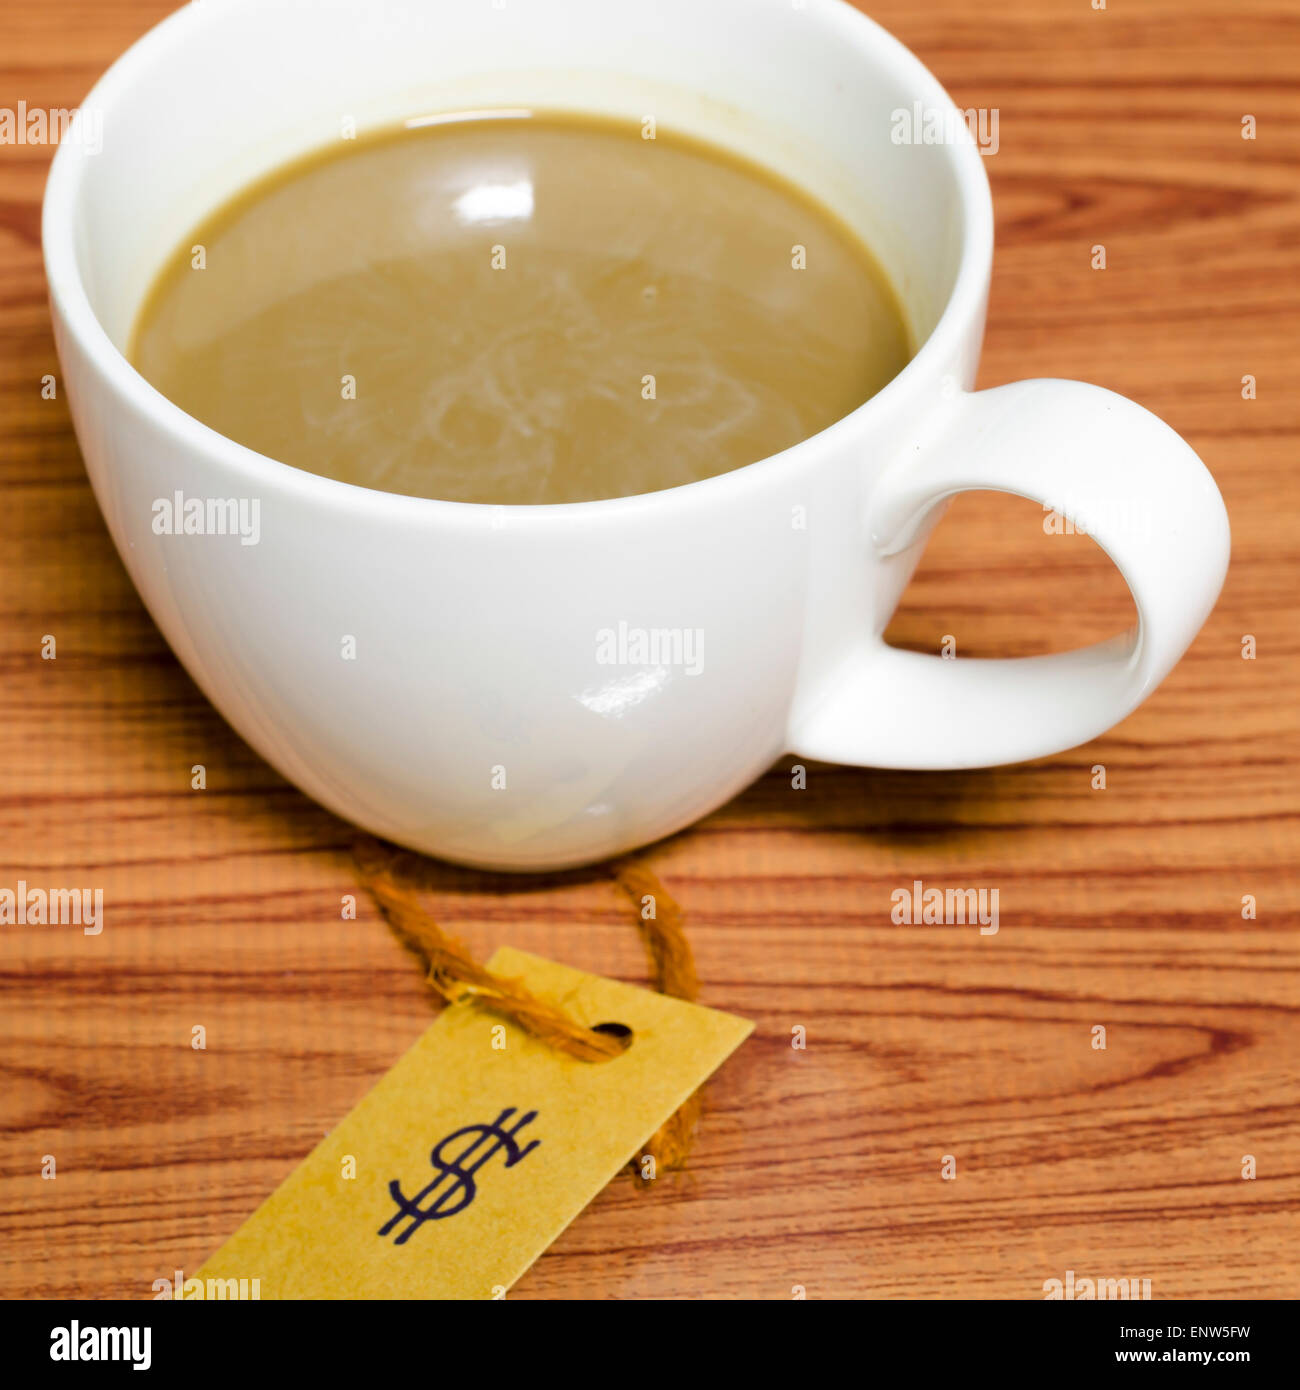 coffee cup with price tag on wood background Stock Photo